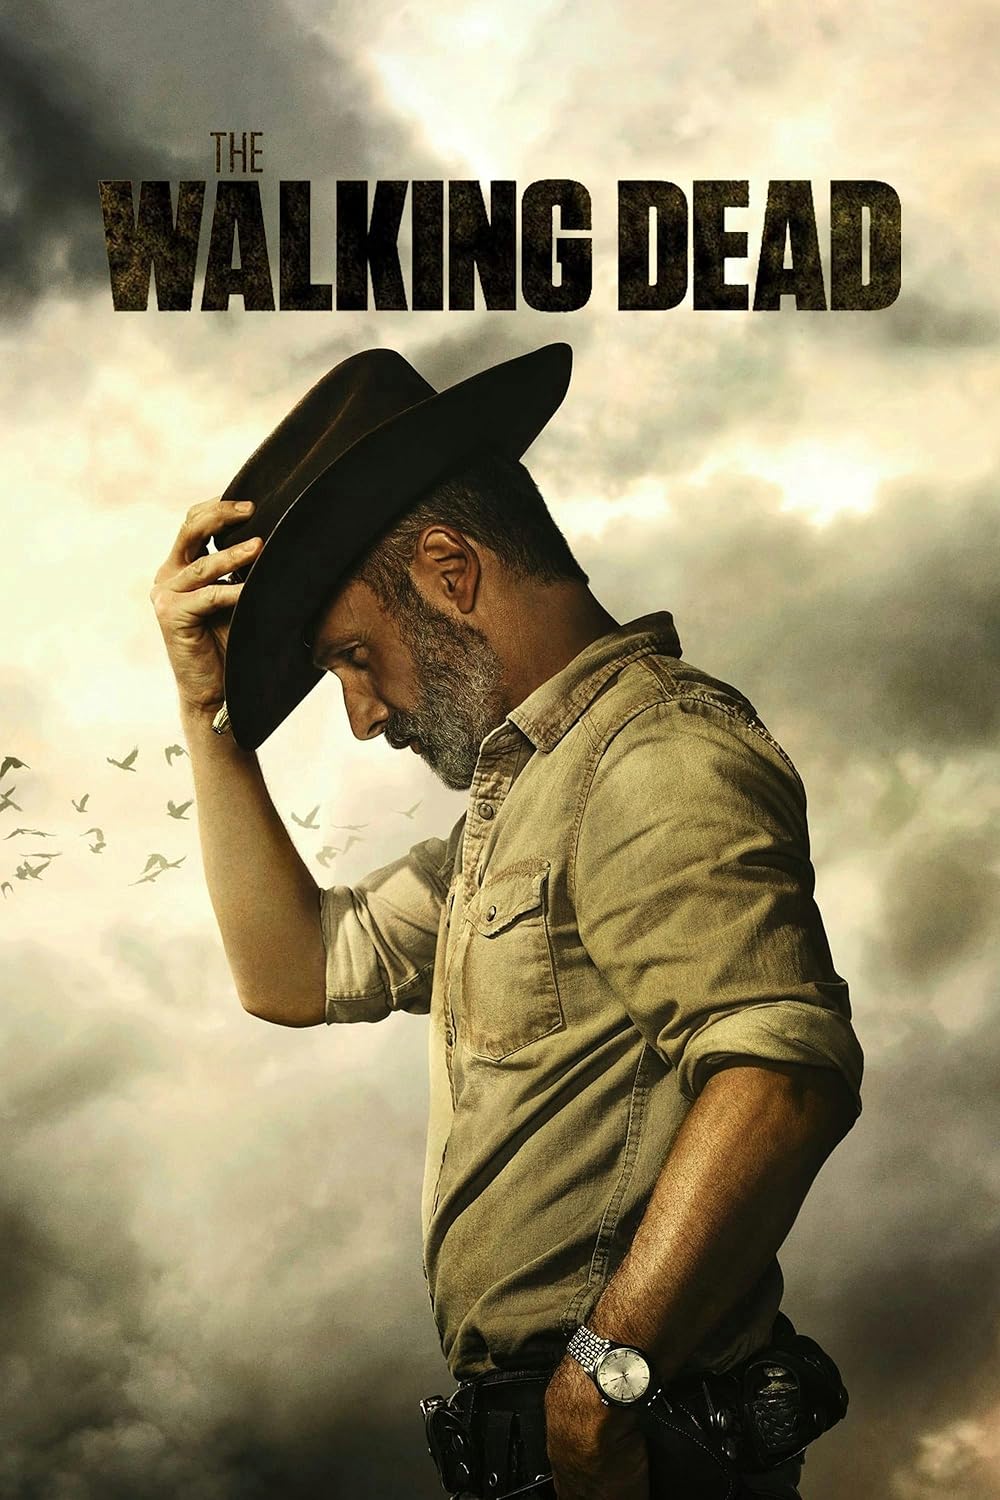 The Walking Dead Show Poster